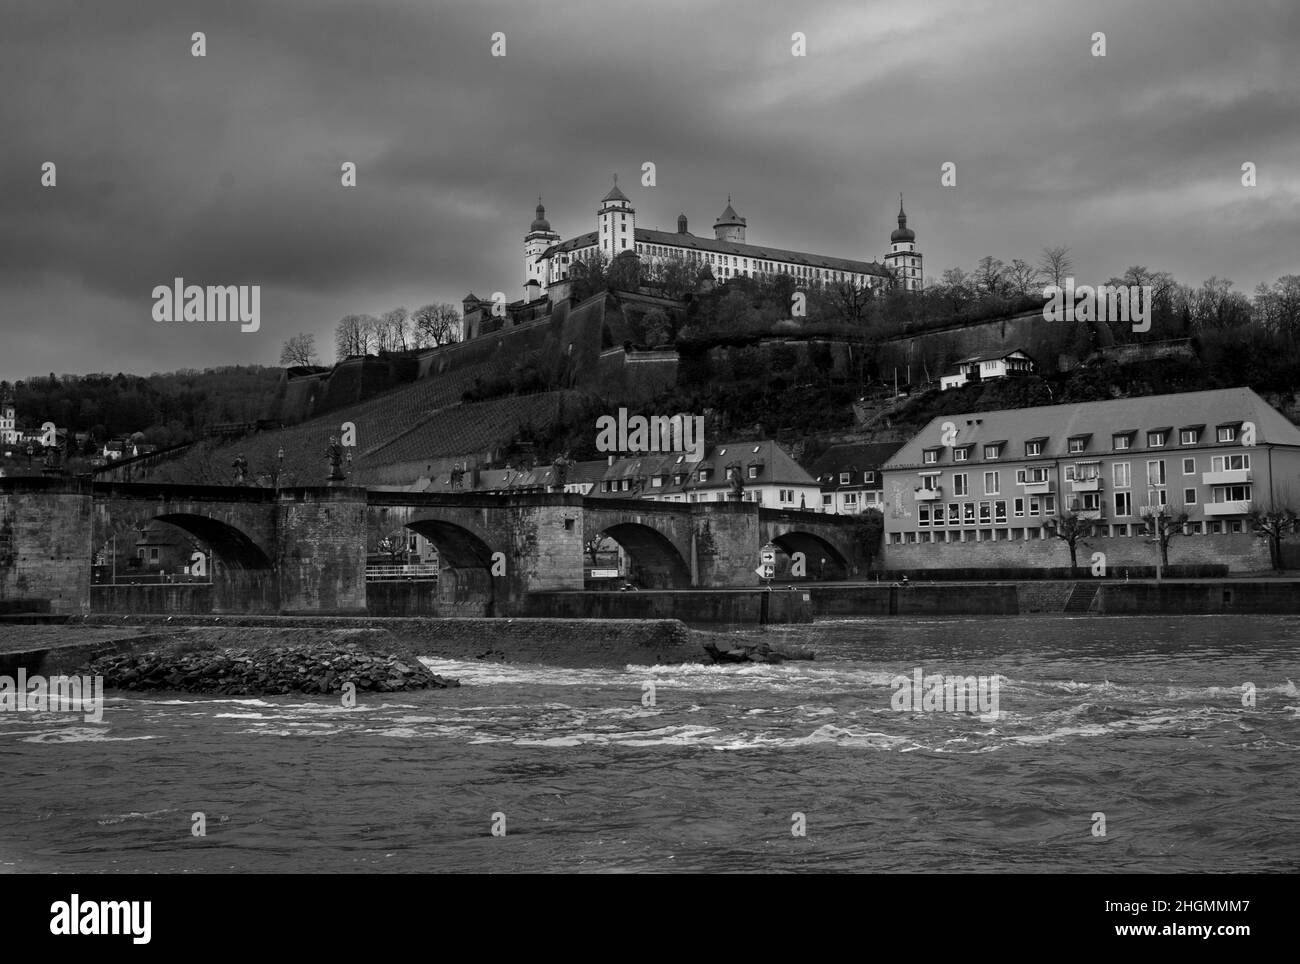 Marienberg Fortress and Old Main Bridge Cityscape in Wurzburg, Germany in Monochrome Black and White Stock Photo